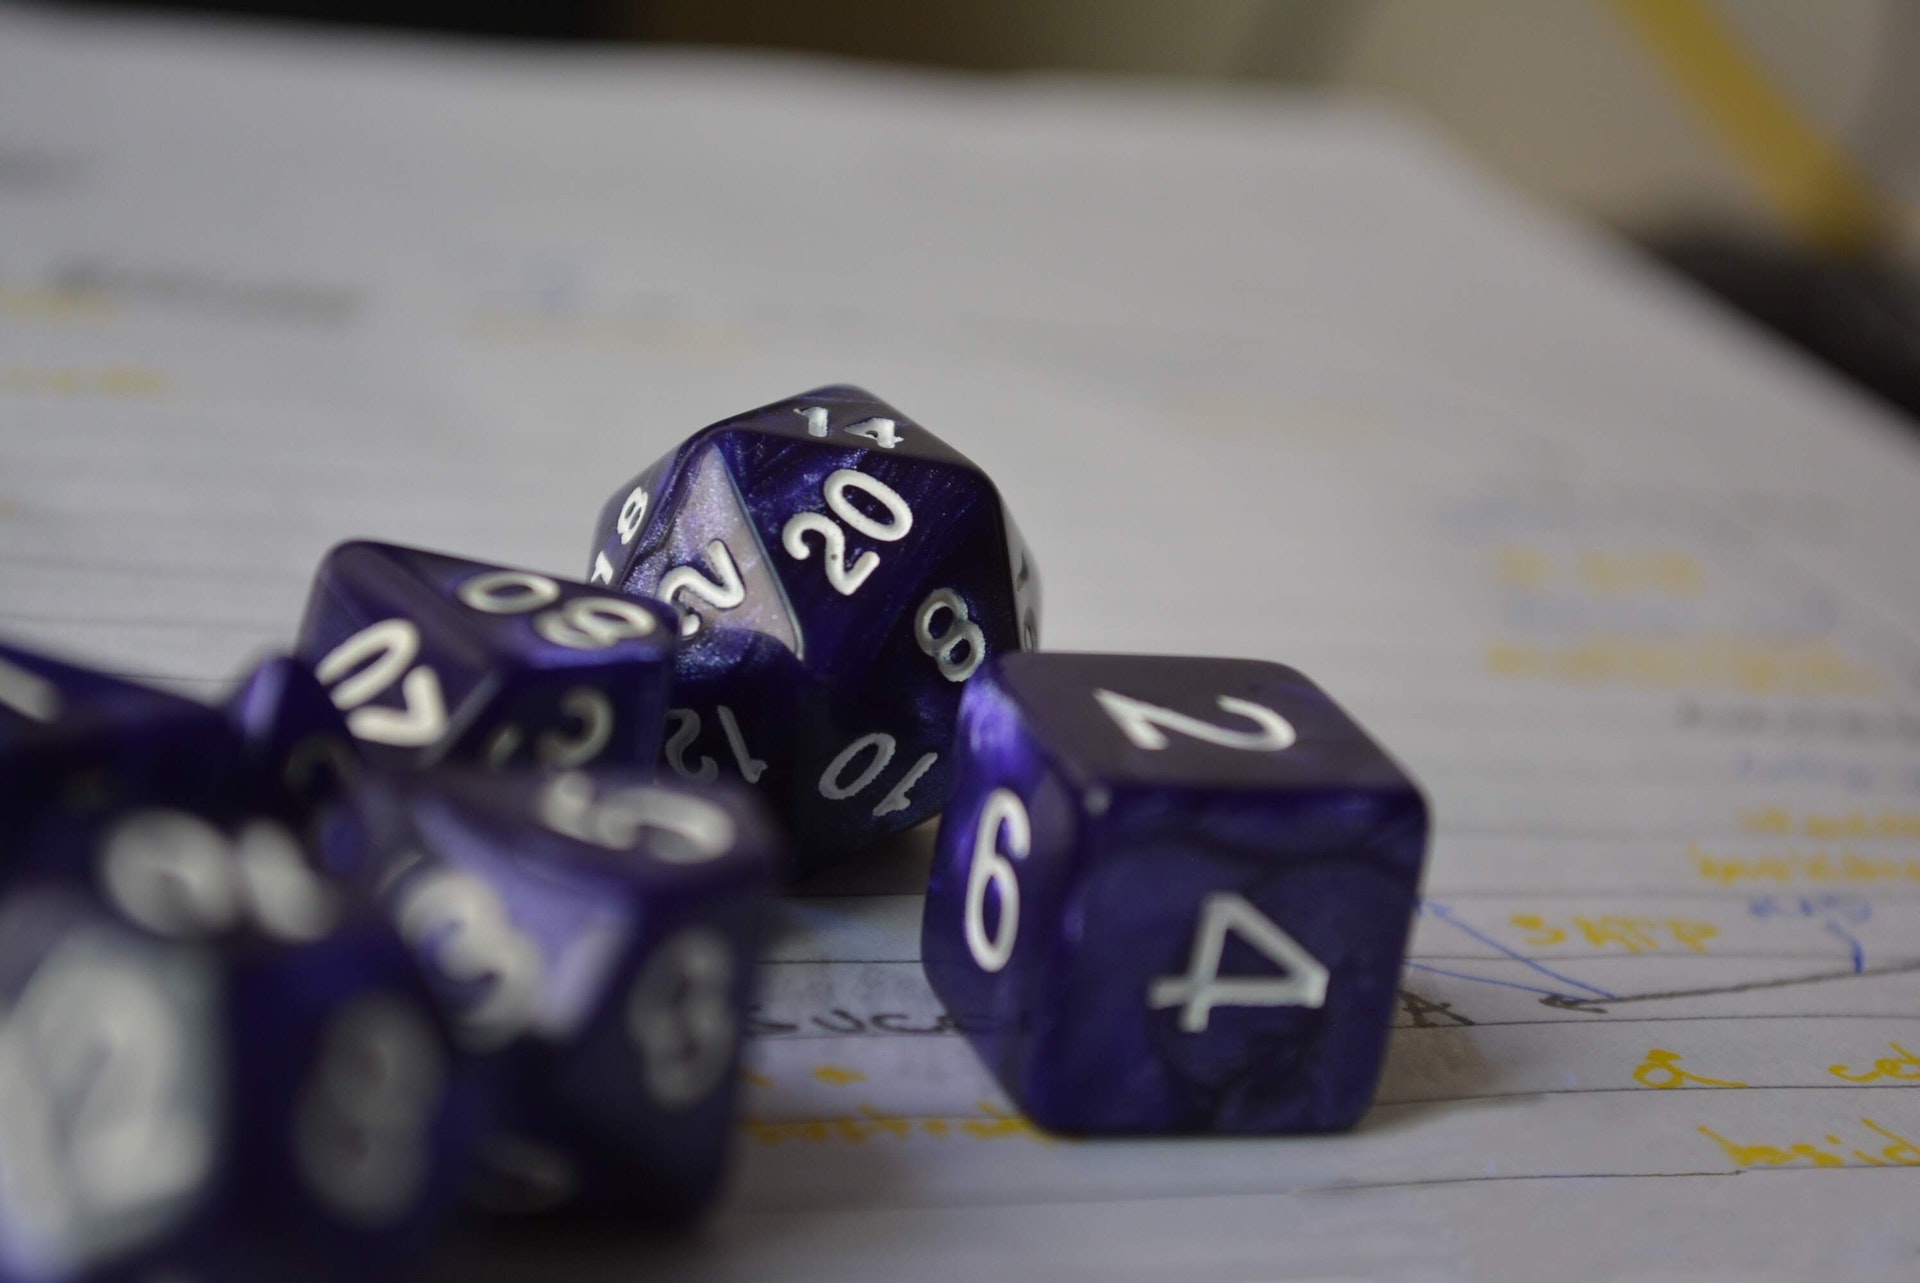 A standard set of polyhedral dice for RPGs